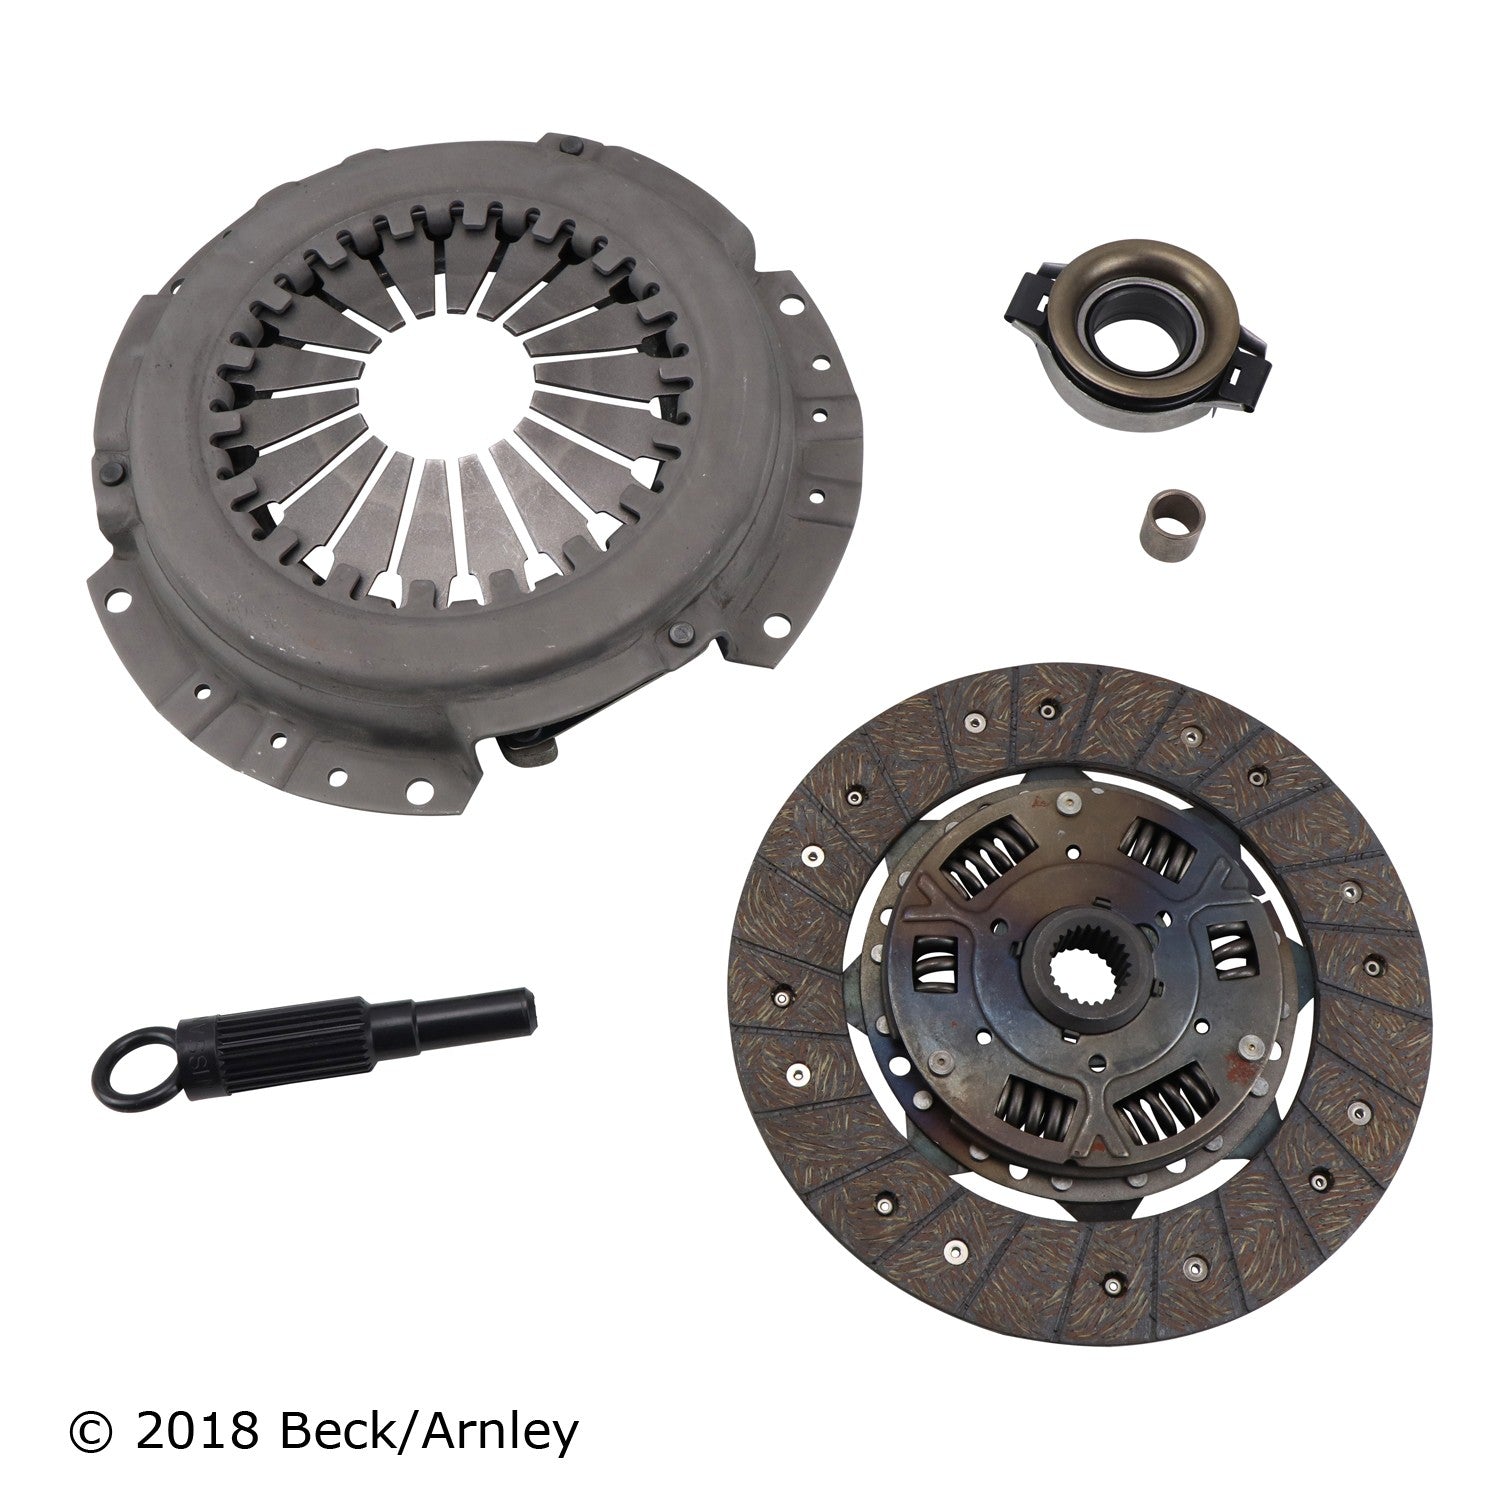 Beck Arnley 061-9250  Clutch Kit for 1993-2001 Nissan Altima FWD L4 2.4L